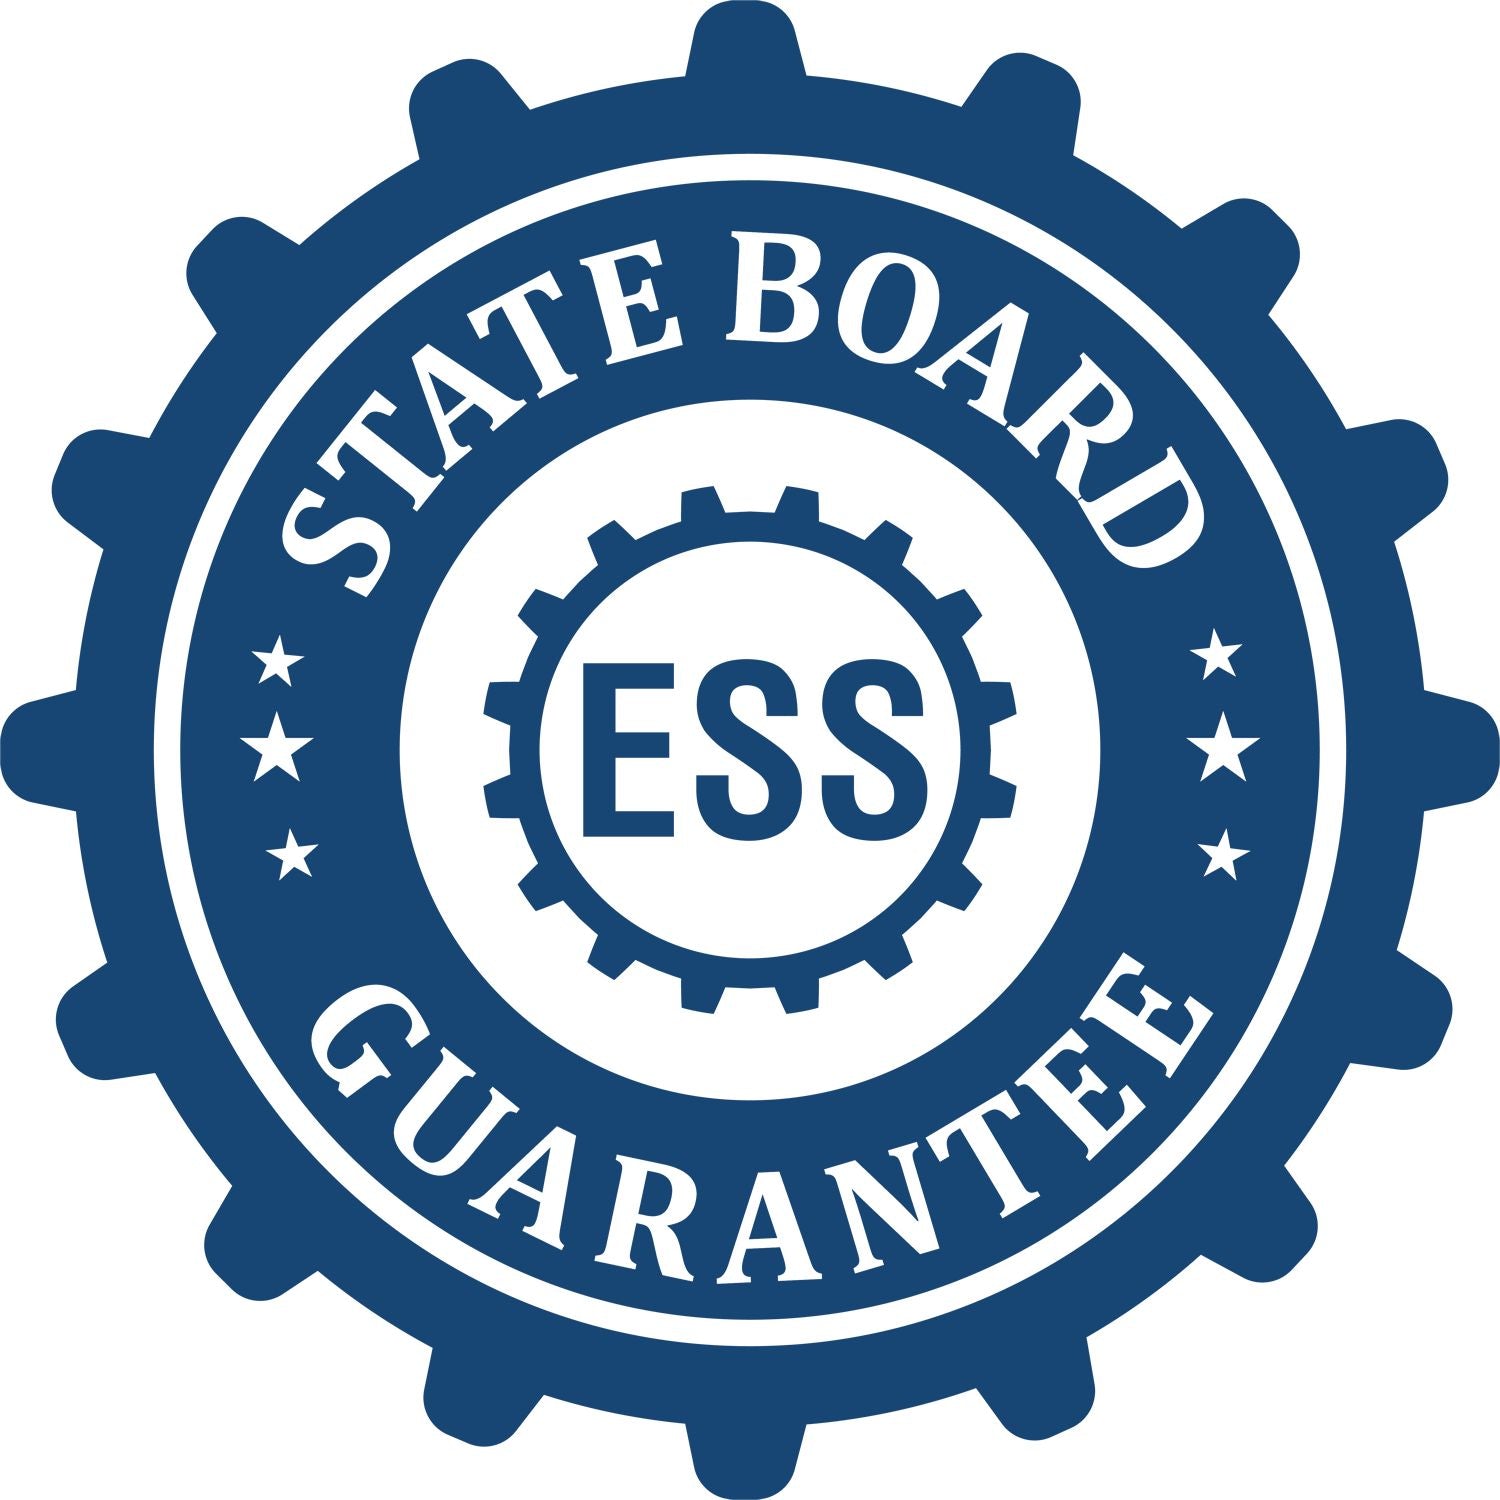 An emblem in a gear shape illustrating a state board guarantee for the Connecticut Long Reach Landscape Architect Embossing Stamp product.